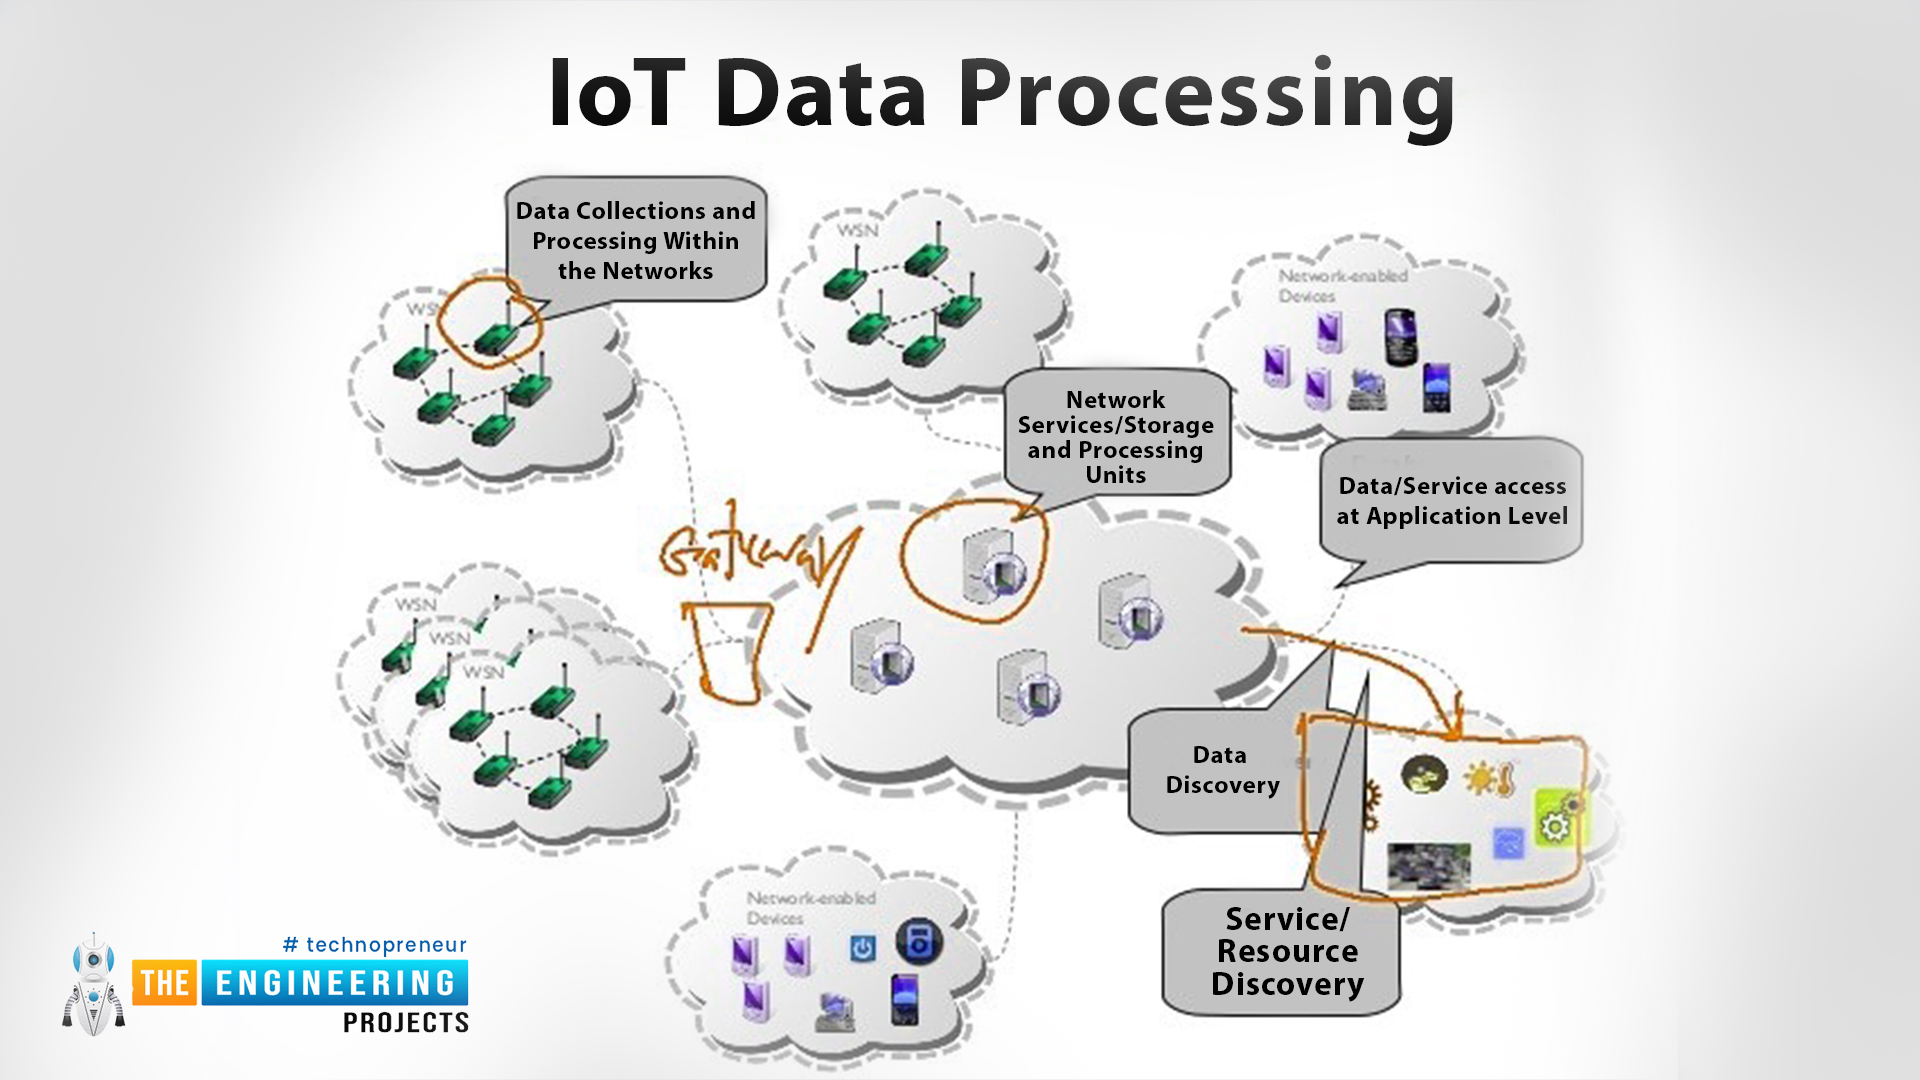 Introduction of IoT components, IoT components, sensors in Iot, connectivity, gateway, cloud computing, user interface, GUI, Data Processing